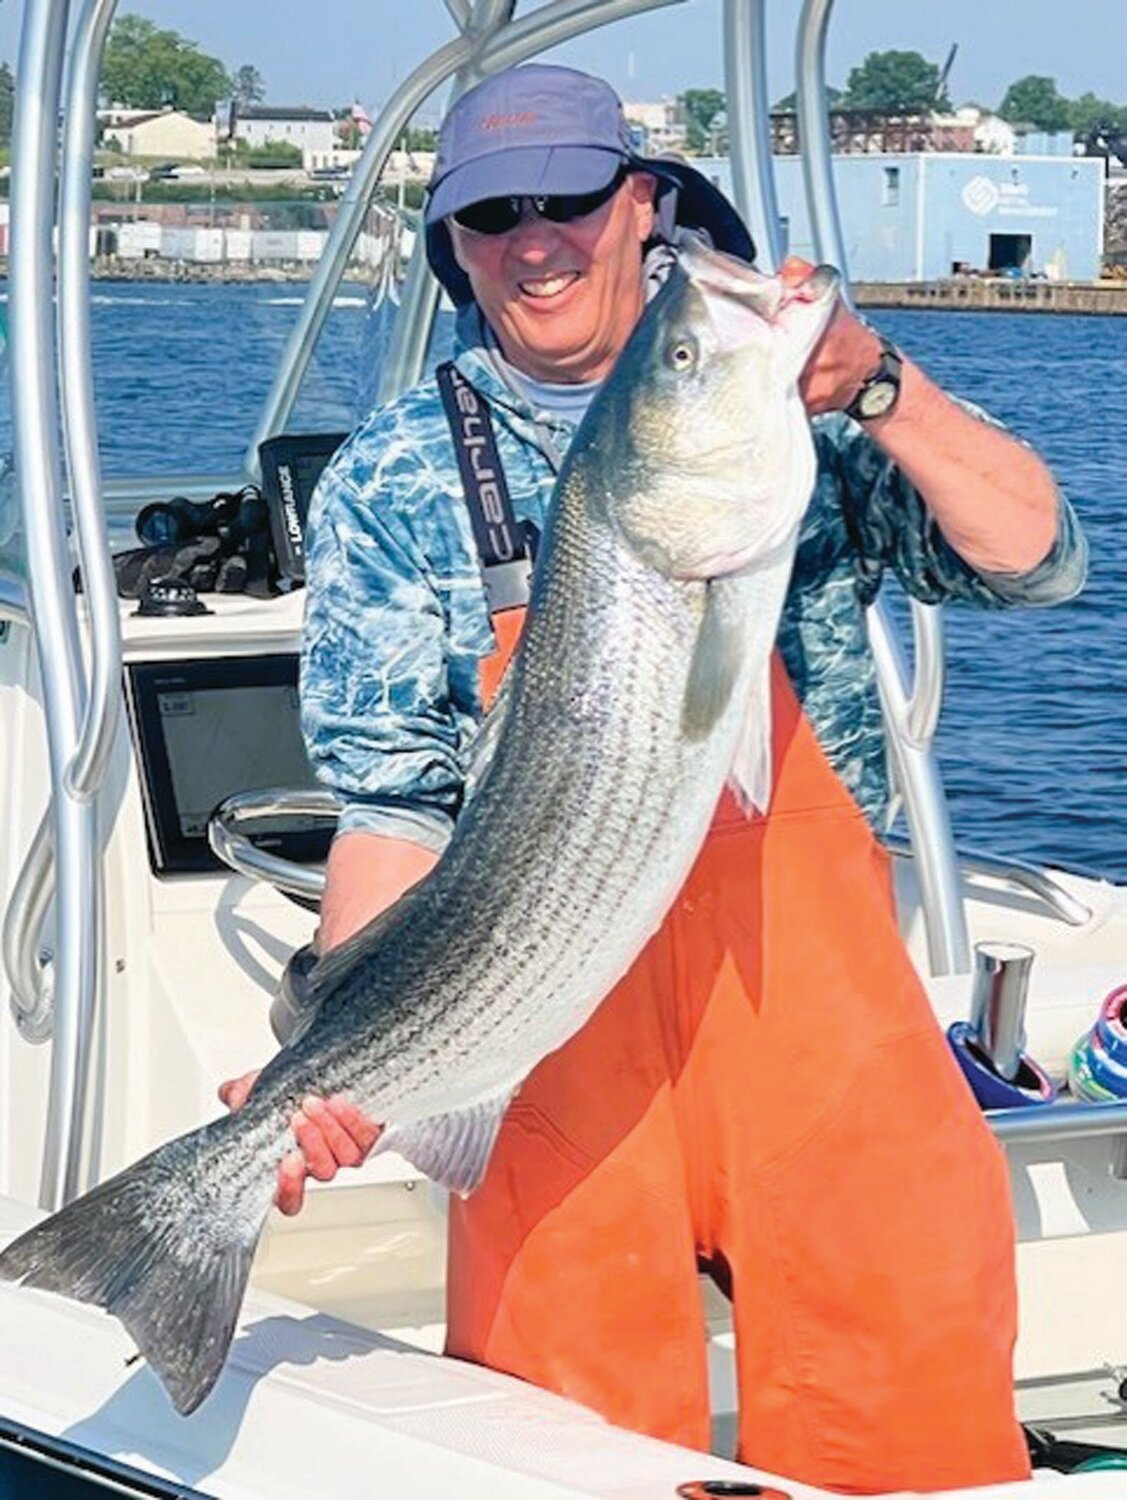 BIG BASS: Mike Swain of Coventry, an expert large striped bass angler, caught and released this 30-pound striper last weekend in the upper Providence River, using a live Atlantic menhaden (pogie) as bait. (Submitted photos)